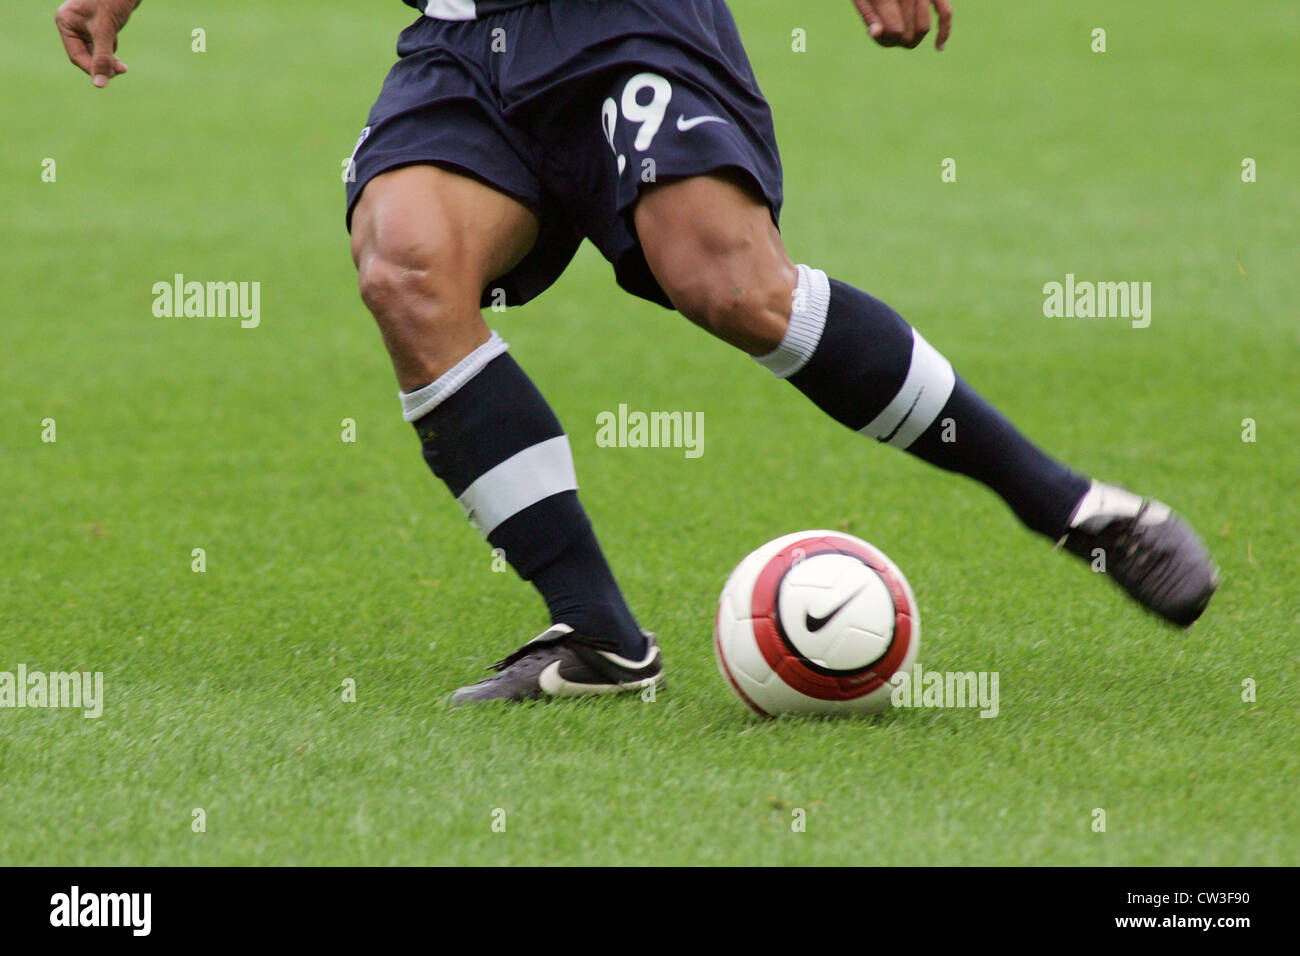 Berlin, Soccer player in action Stock Photo